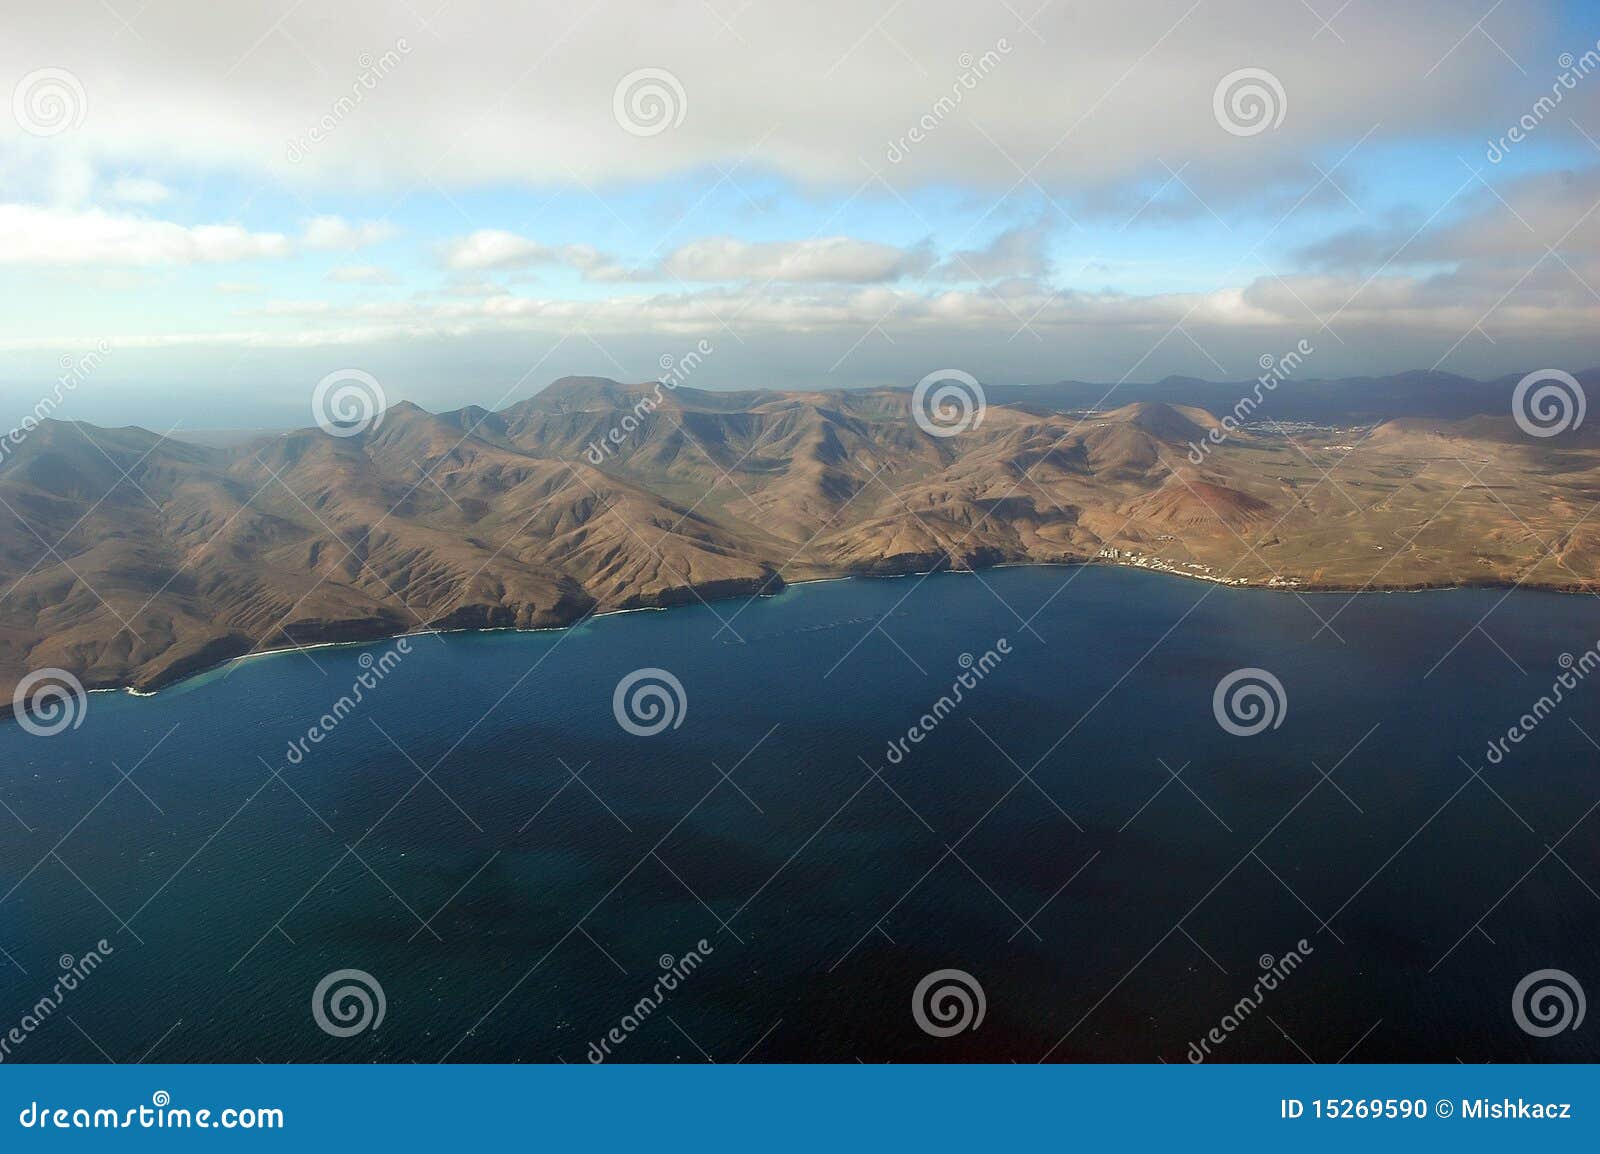 the canary islands